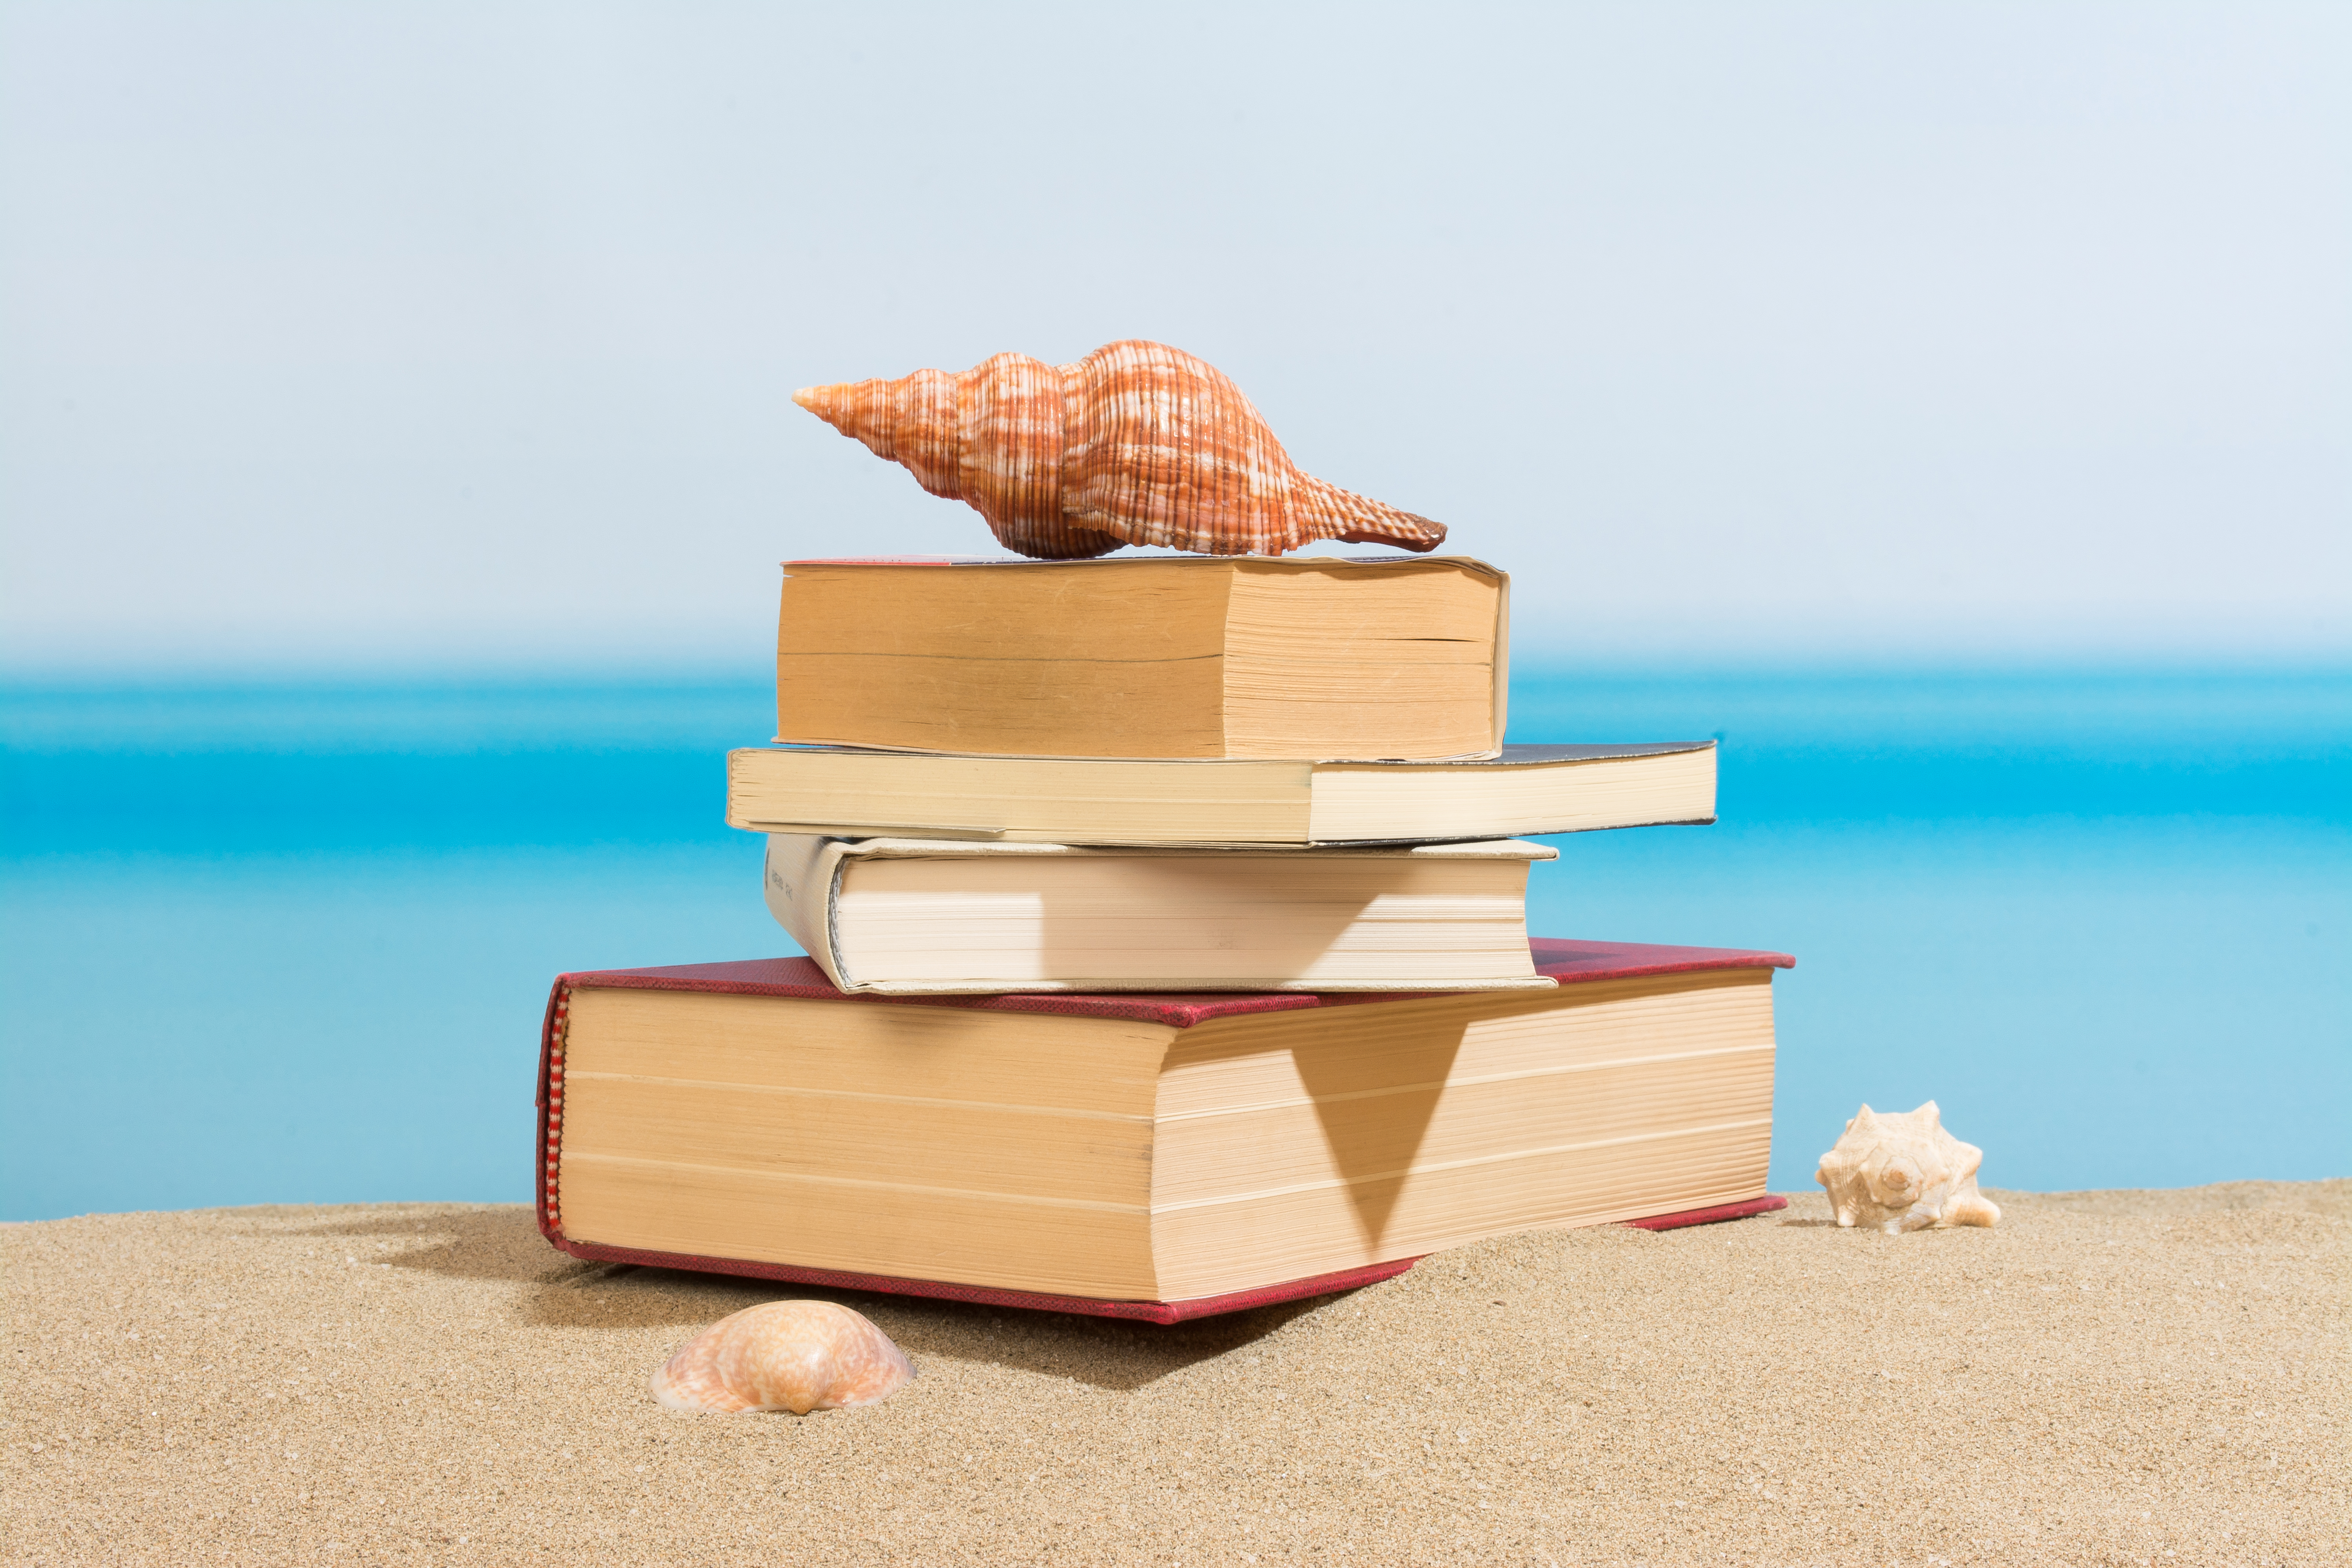 WILEF Global Chair Betiayn Tursi’s Summer Reading Recommendations